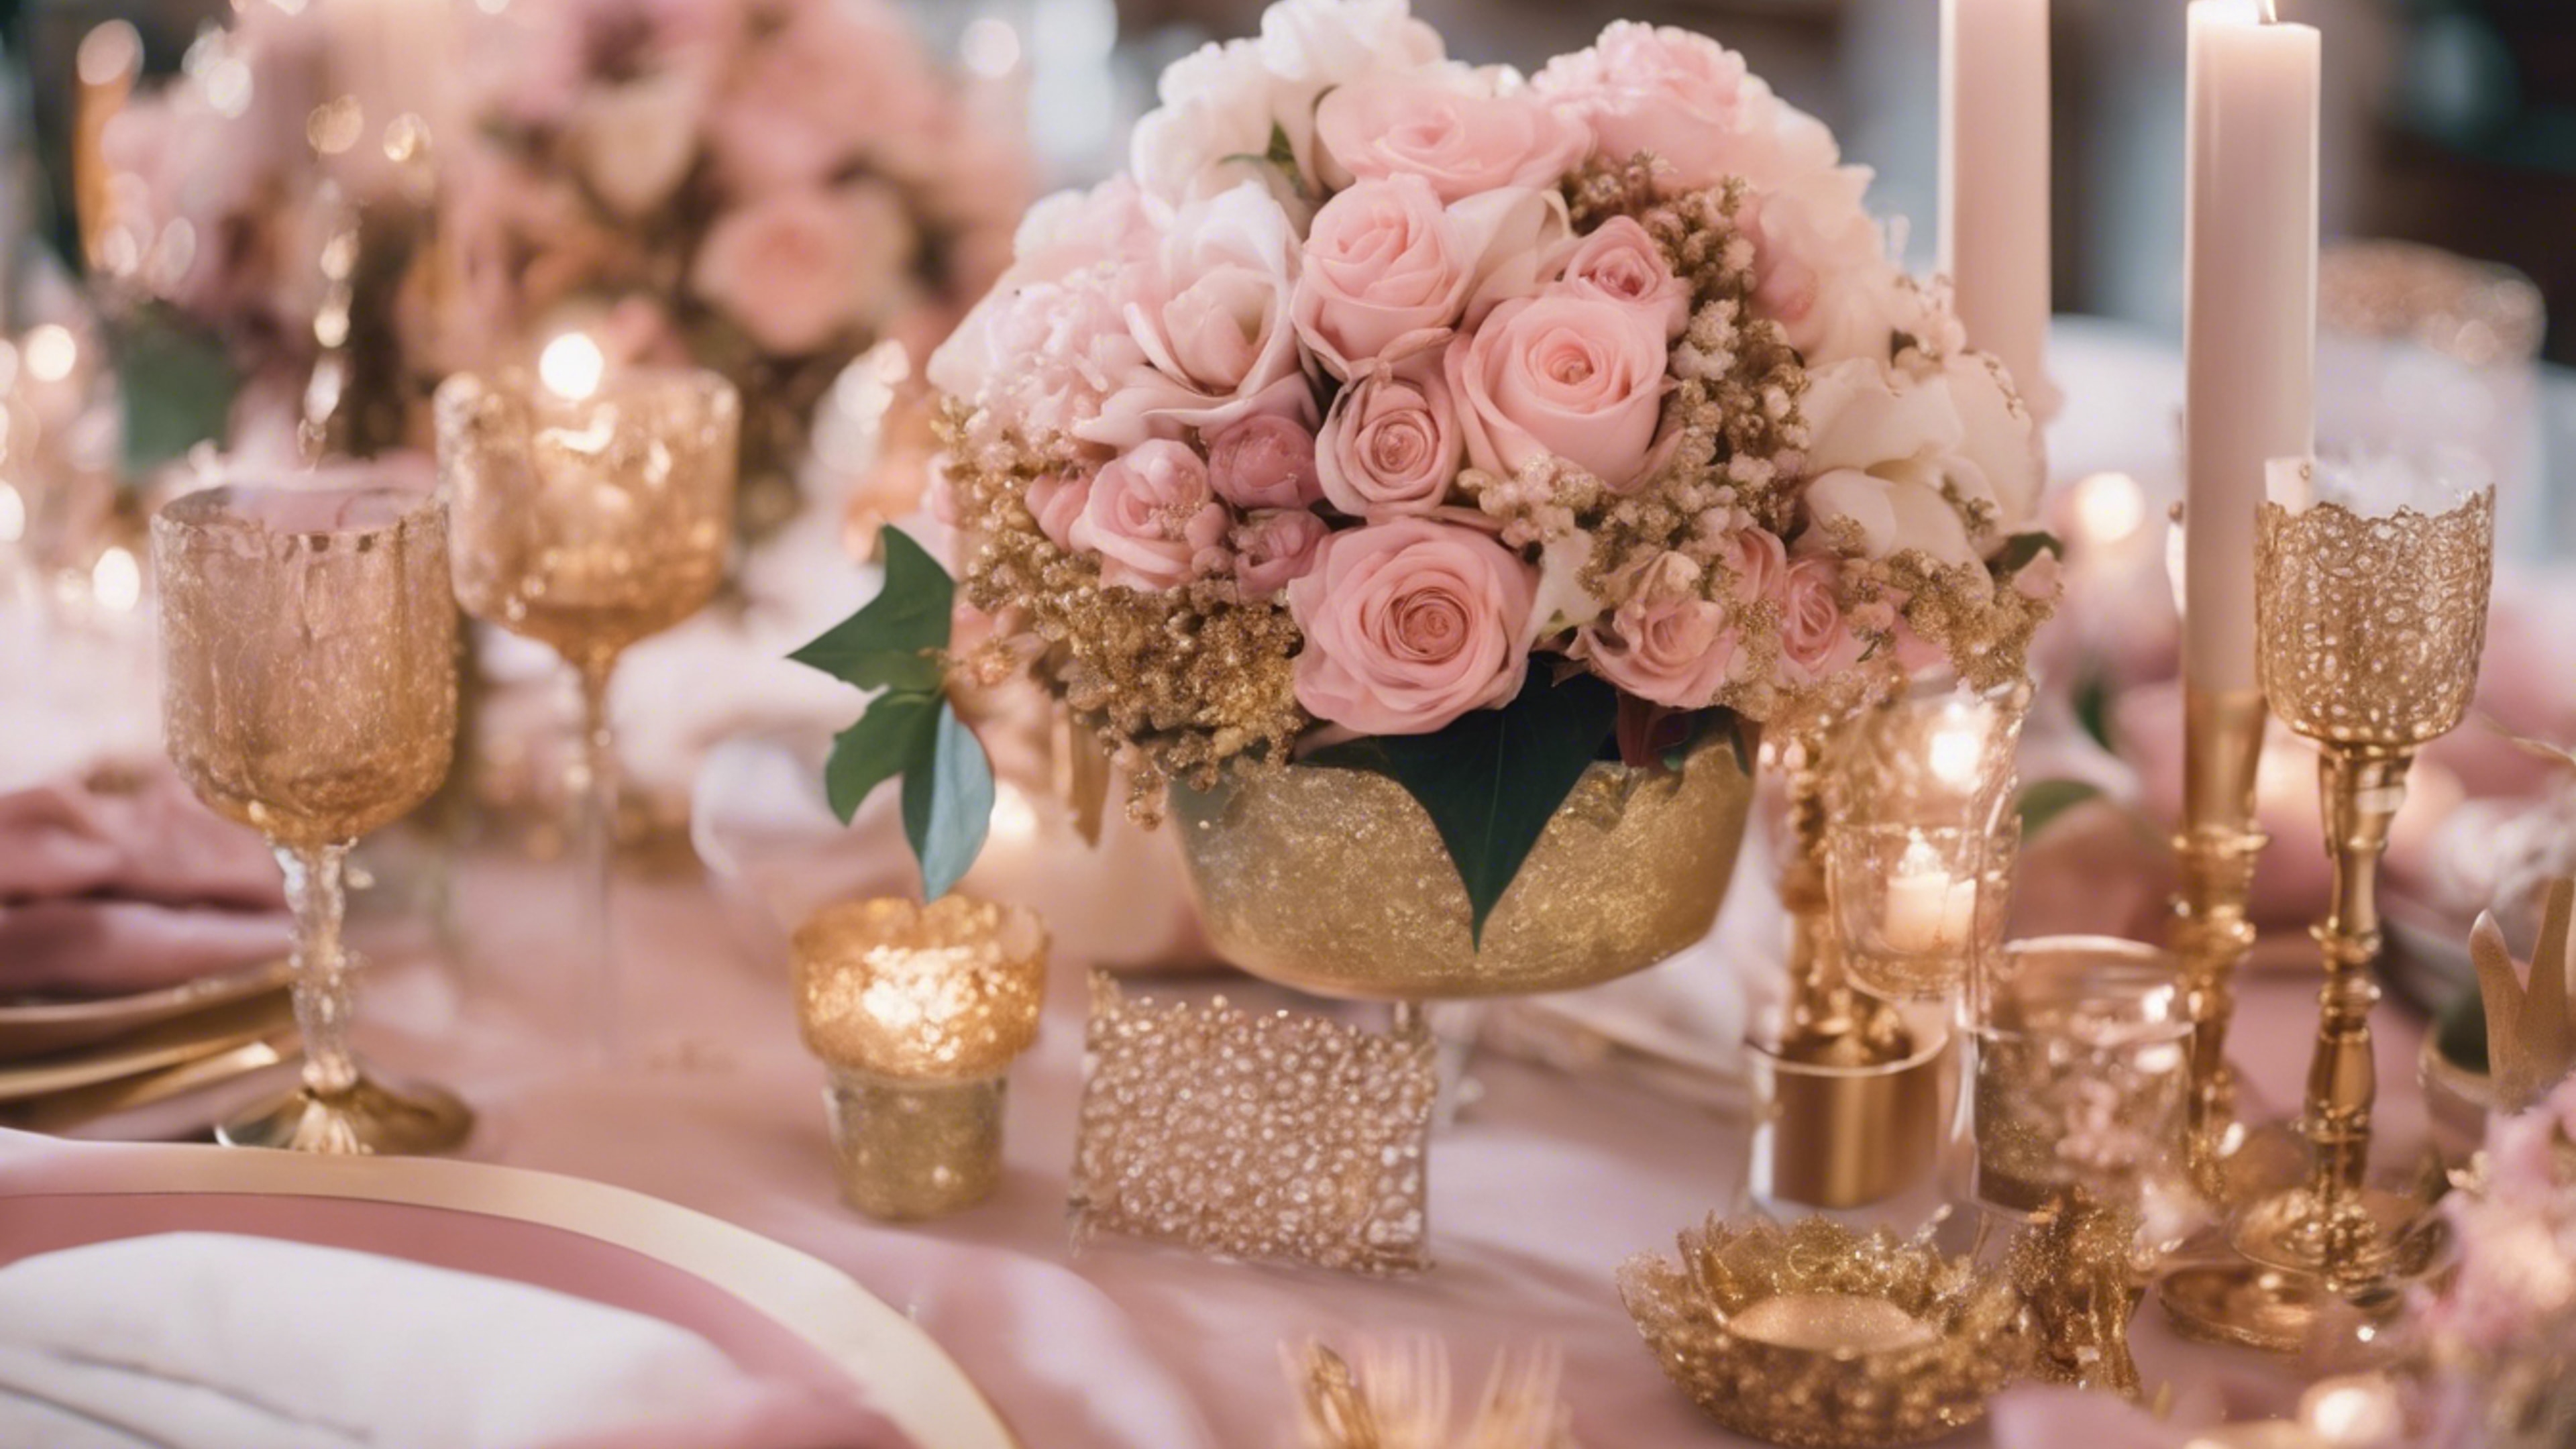 An ethereal pink and gold themed wedding decorations with flowers and metallic accents. טפט[814998f188fb45f48f1c]